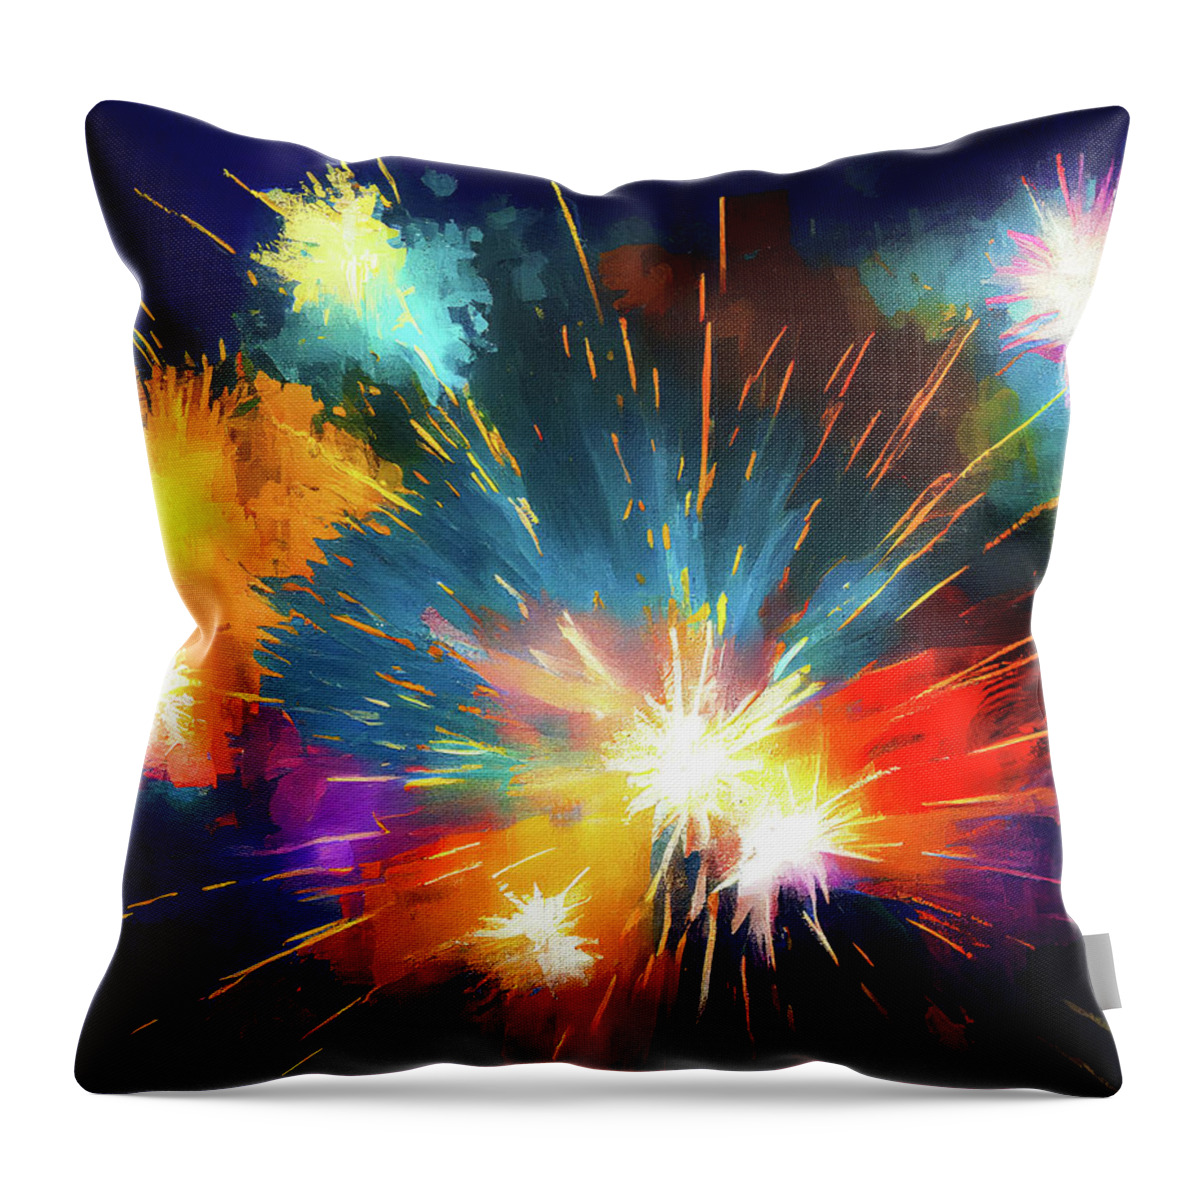 Abstract Throw Pillow featuring the digital art Painting With Light by Mark E Tisdale